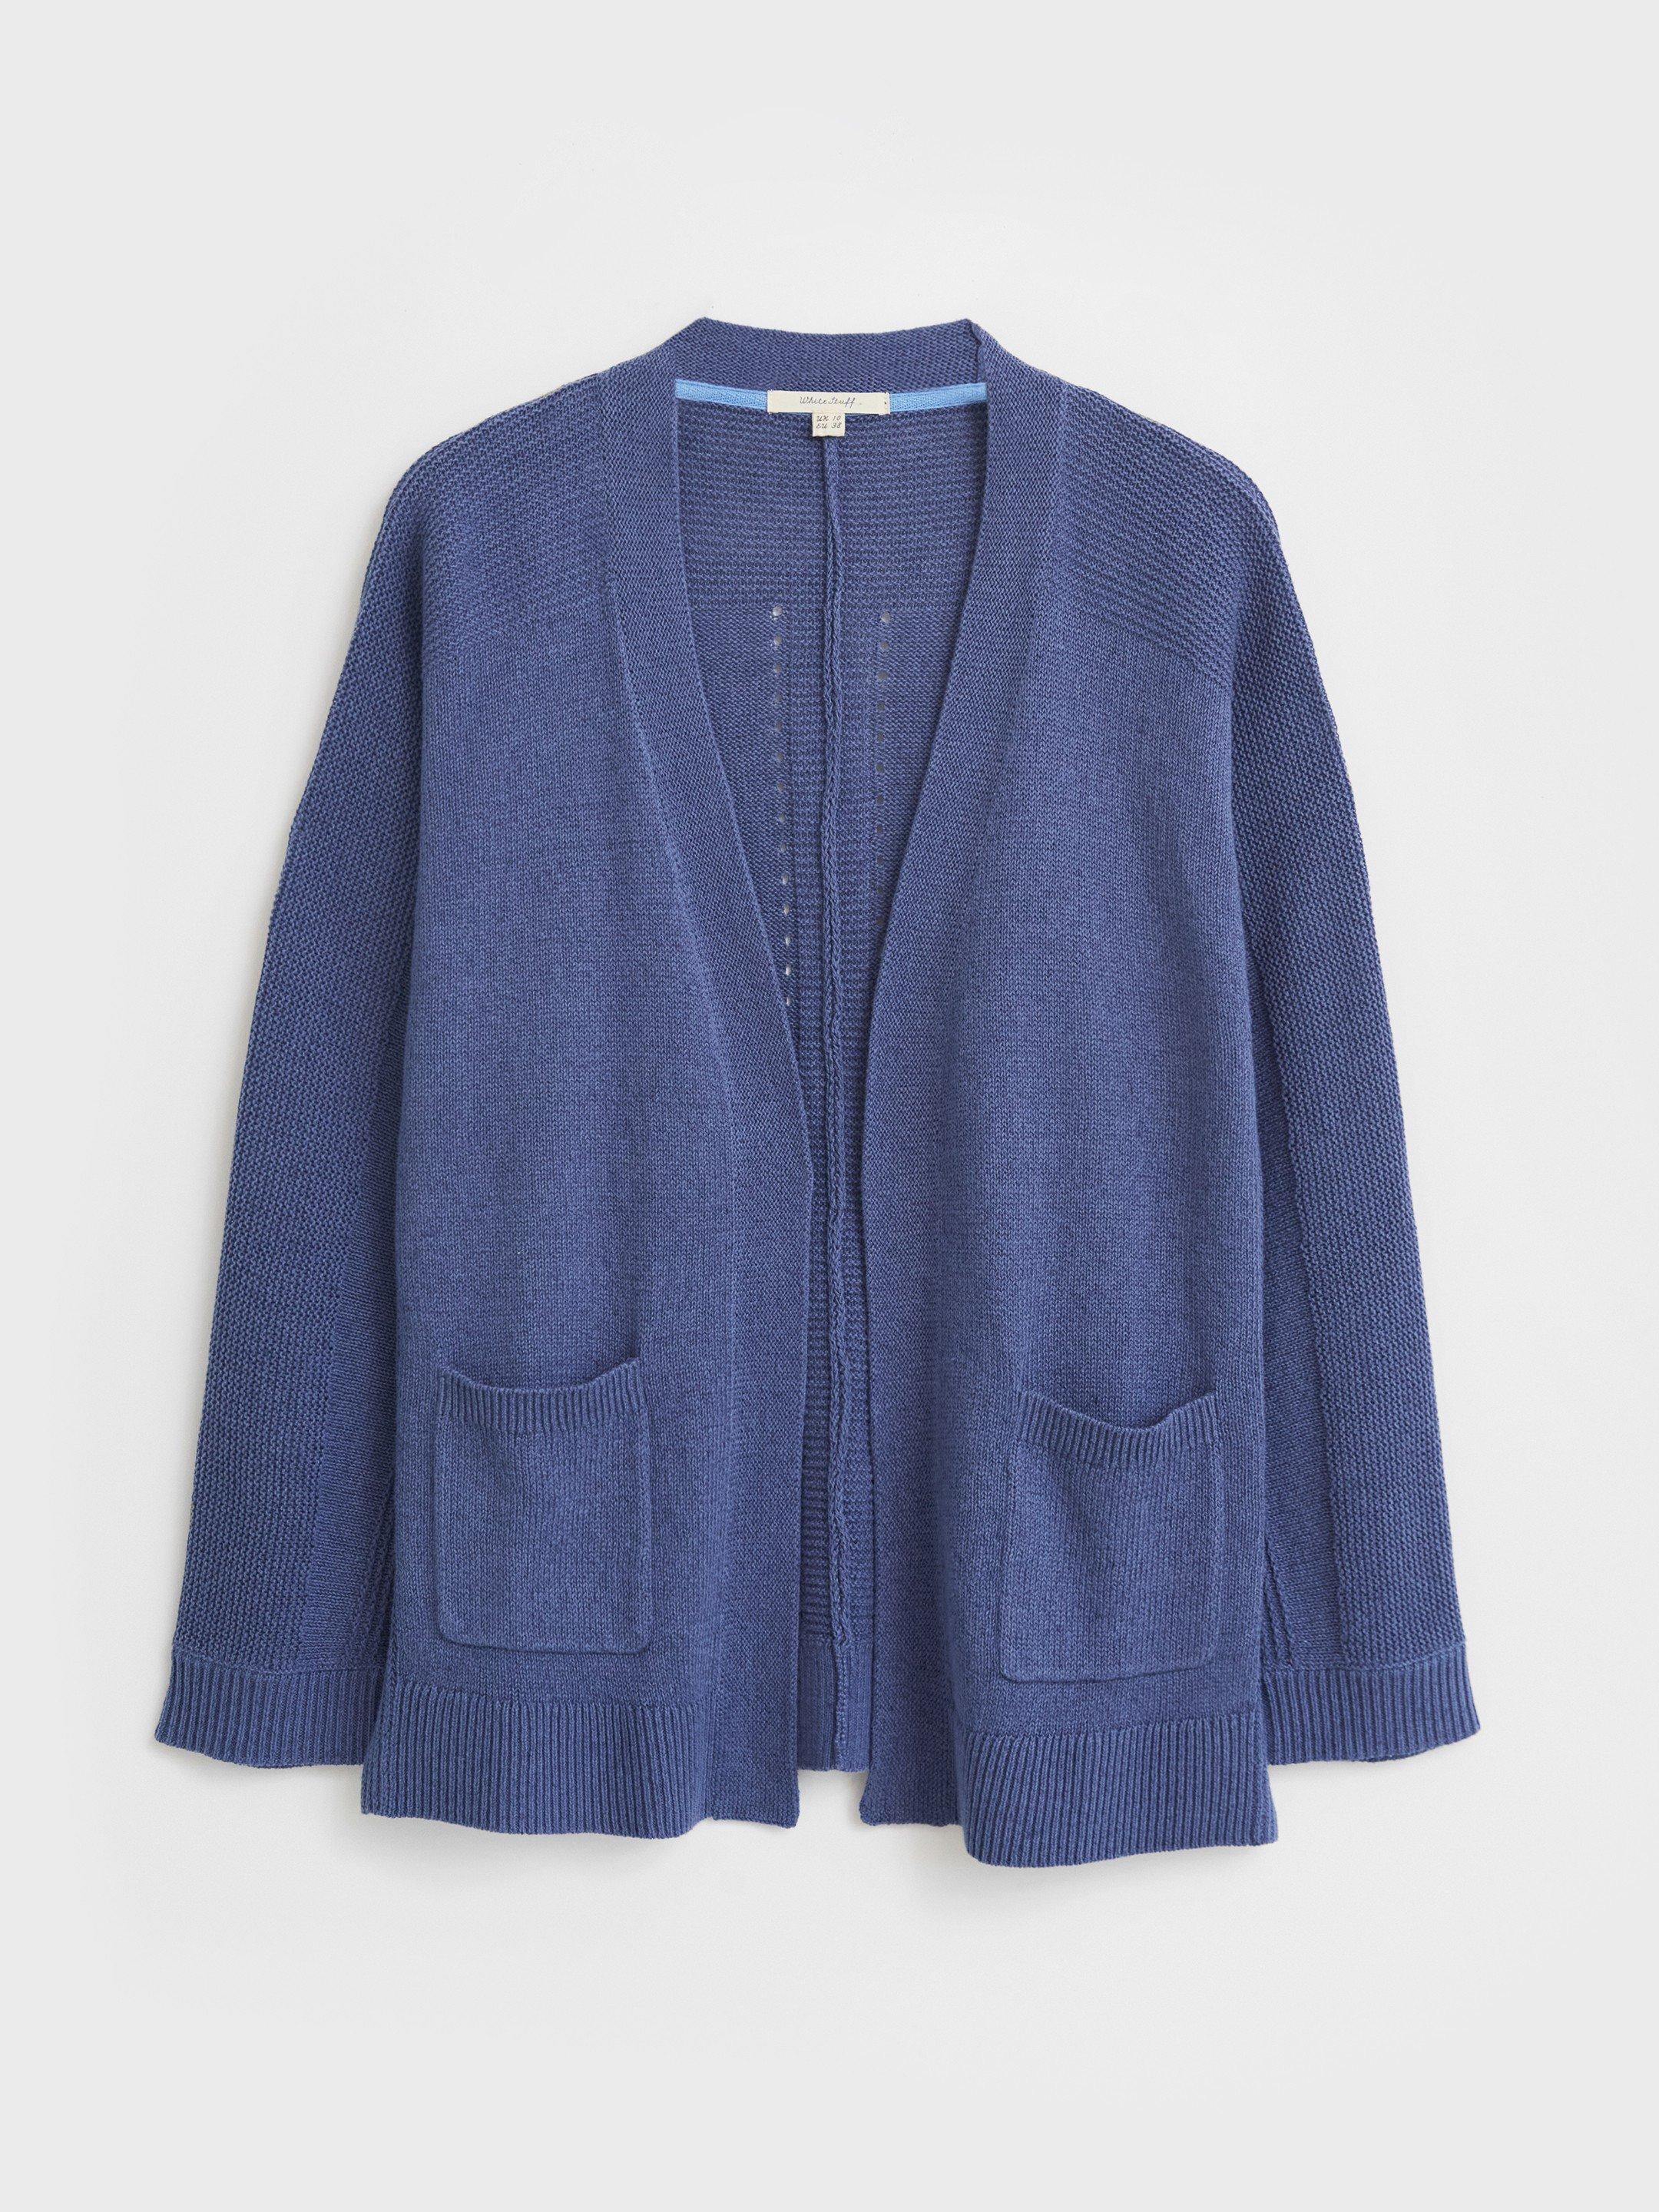 Tiana Cardi in MID BLUE - FLAT FRONT